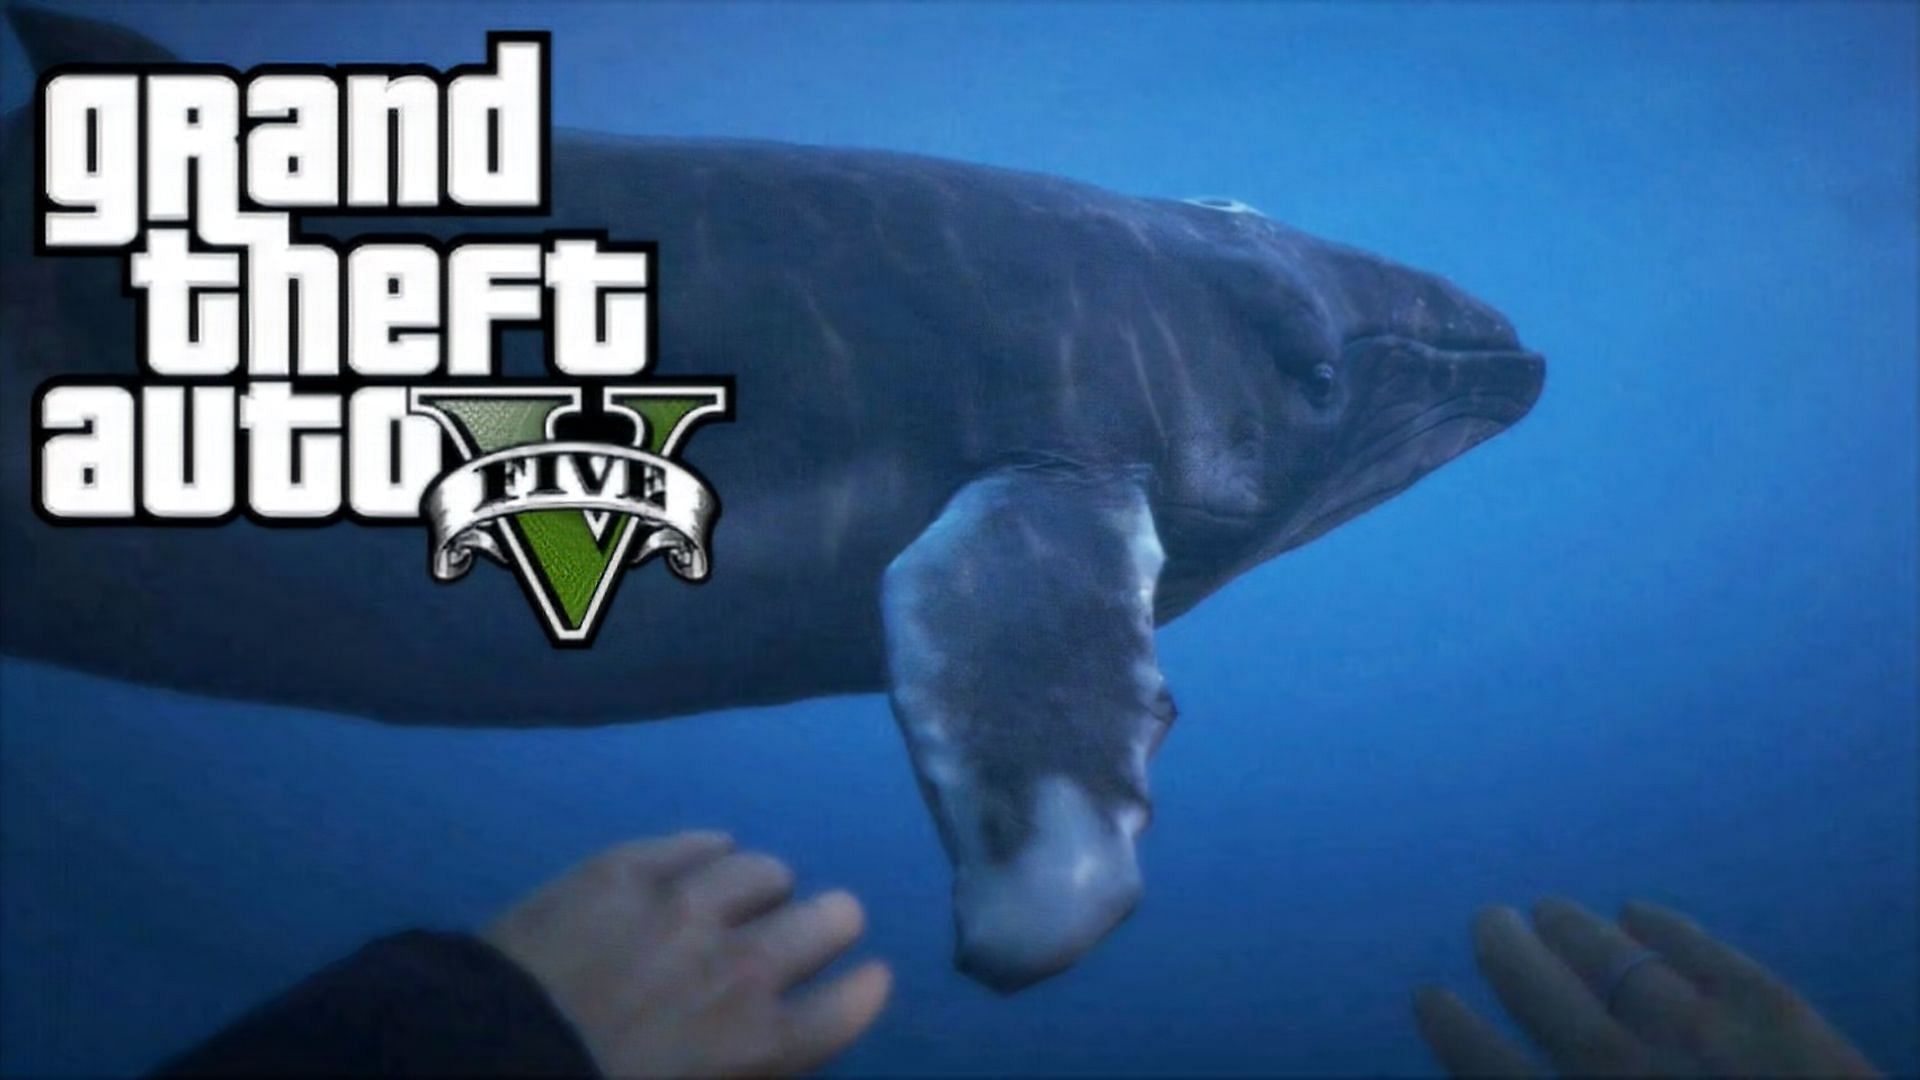 GTA Mods can be chaotic and hilarious. (Image via YouTube/Gtchy1230)